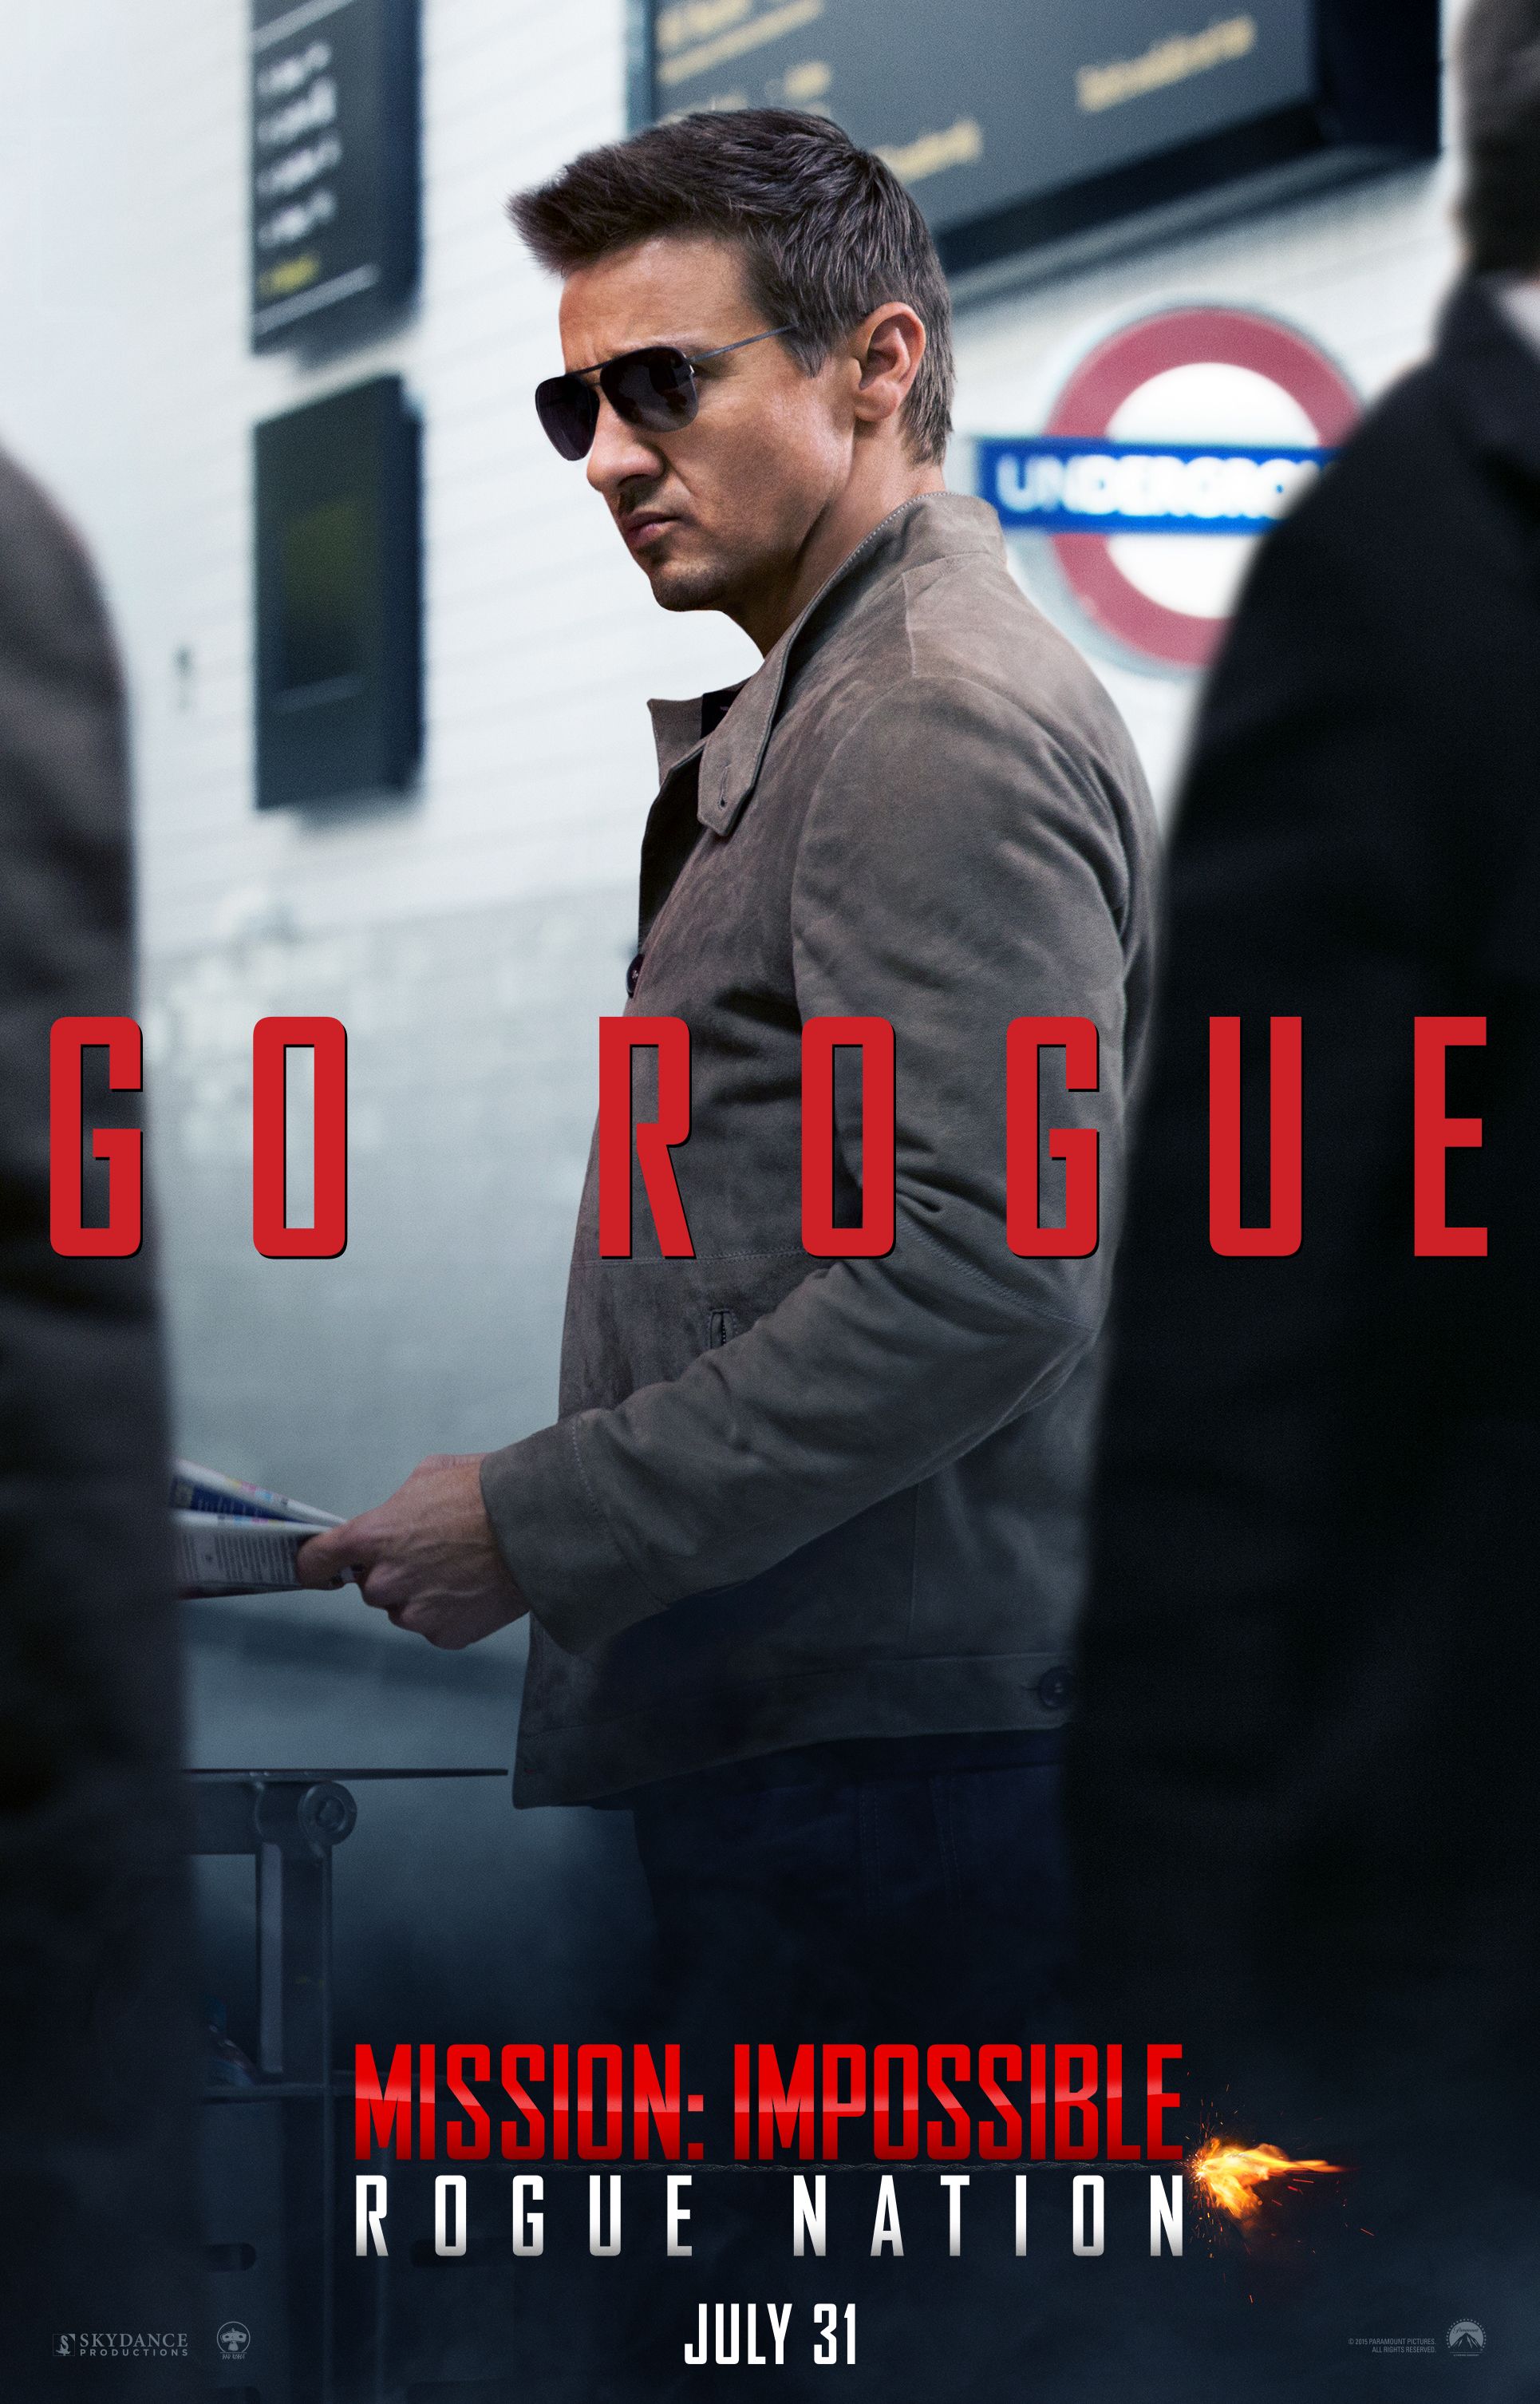 Mission: Impossible Rogue Nation Jeremy Renner Poster